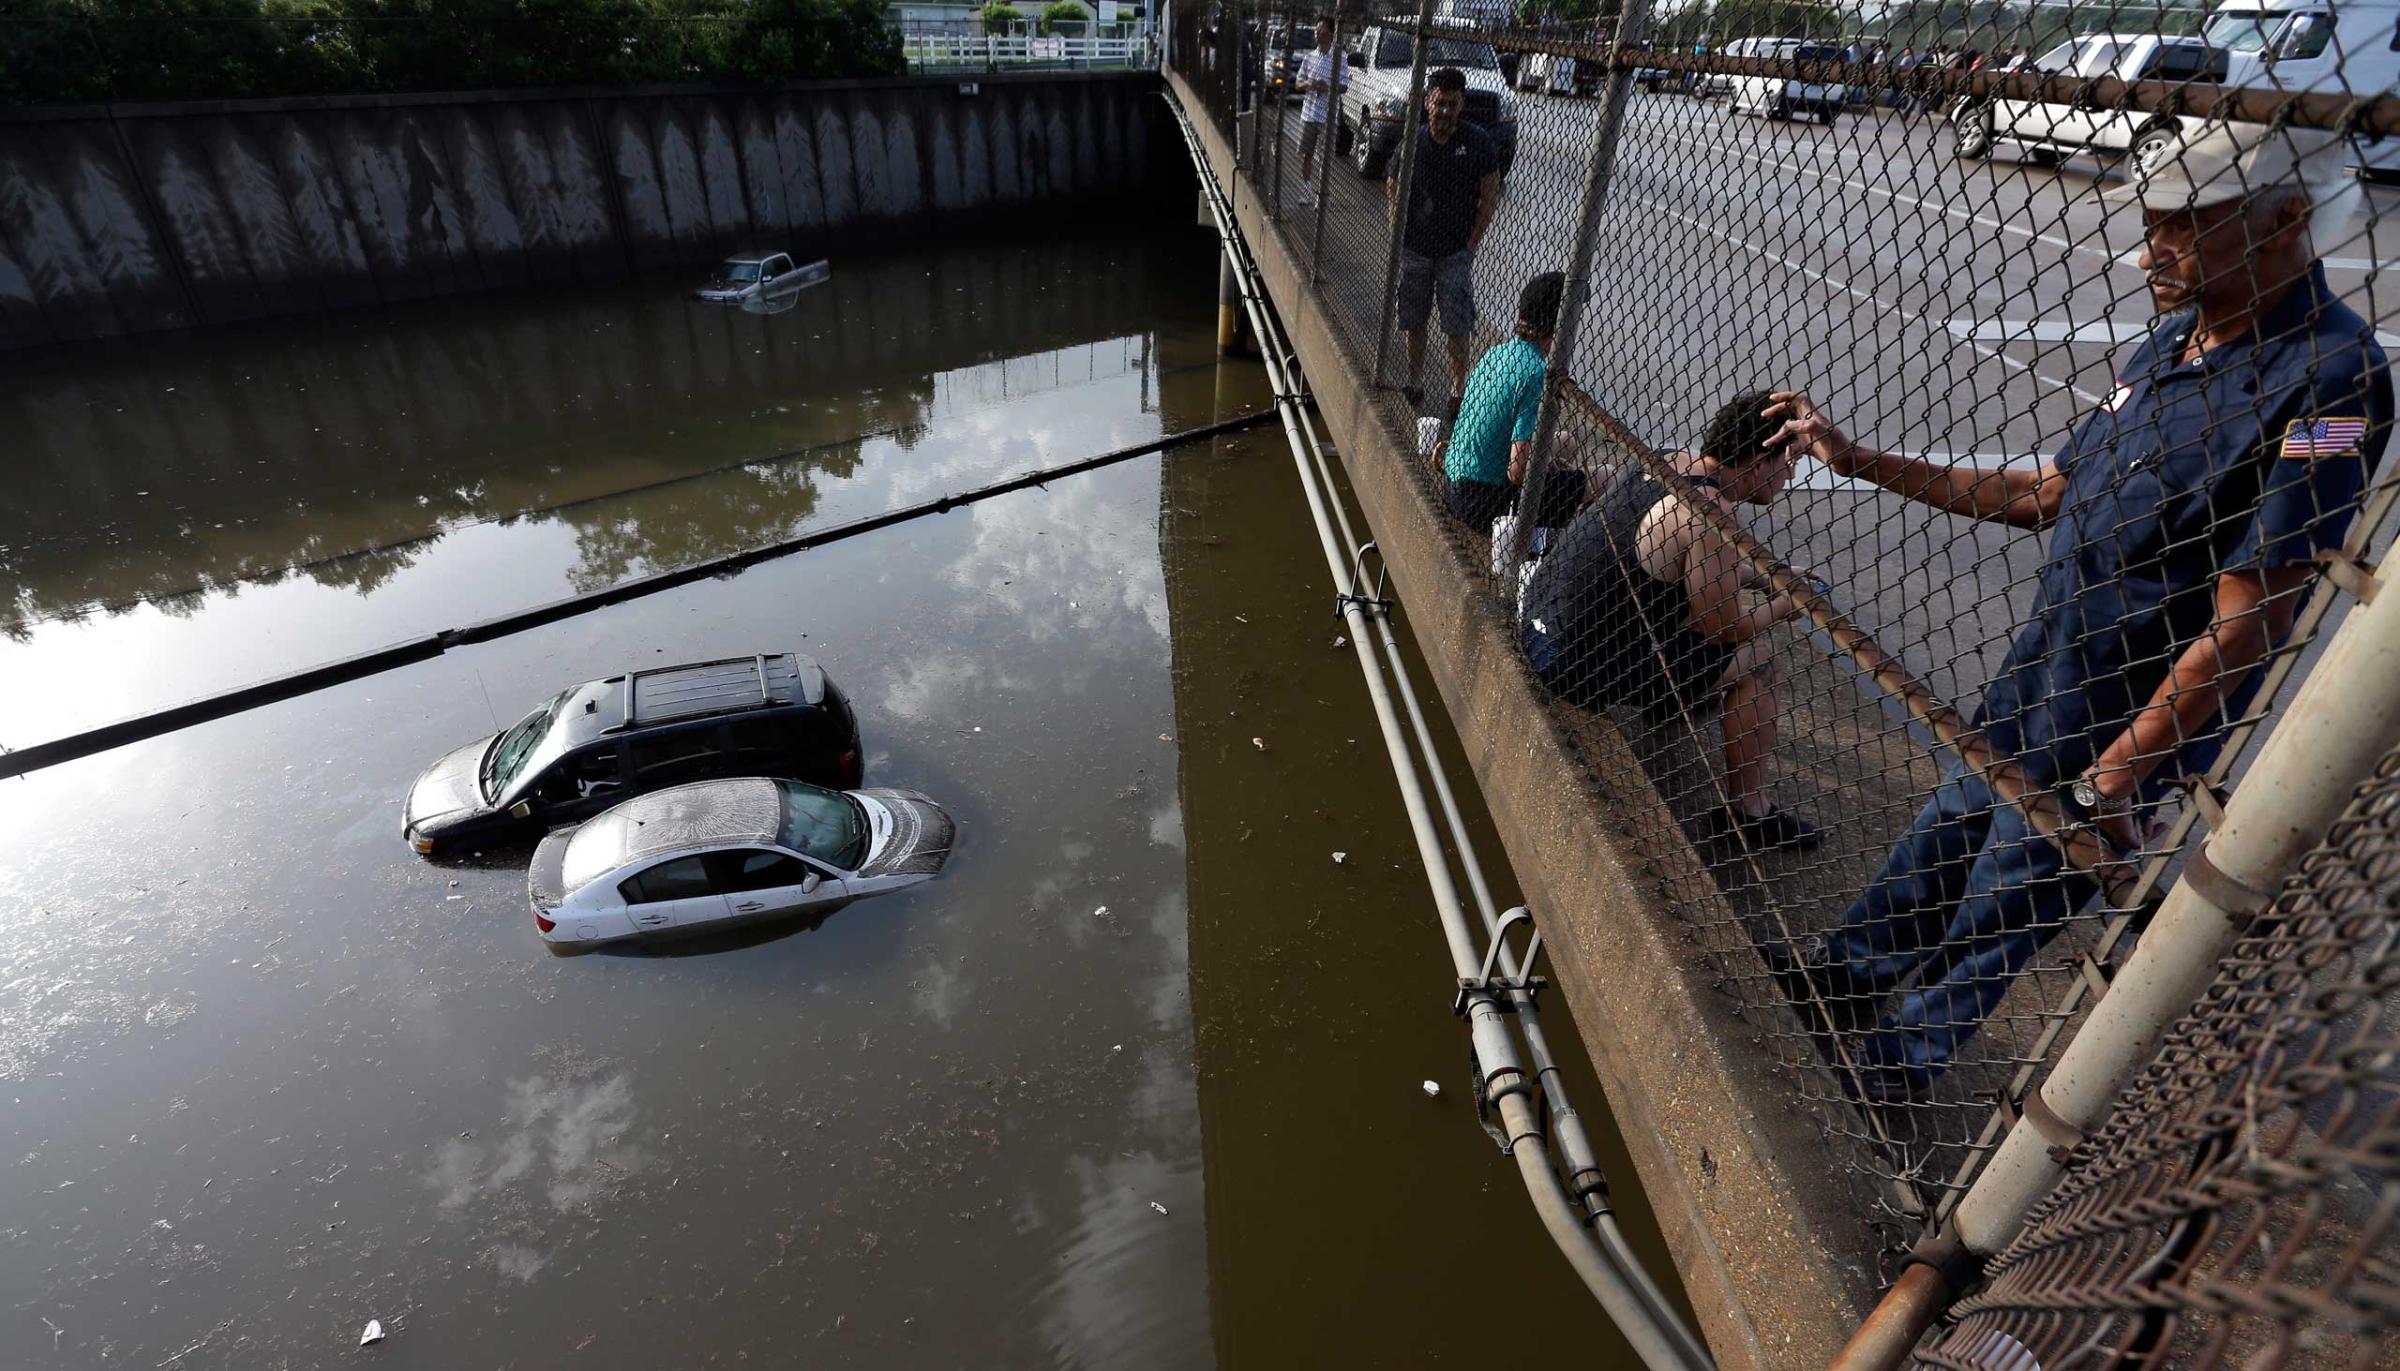 Cars sit in floodwaters along Interstate 45 after heavy overnight rain flooded parts of the highway in Houston on May 26, 2015.